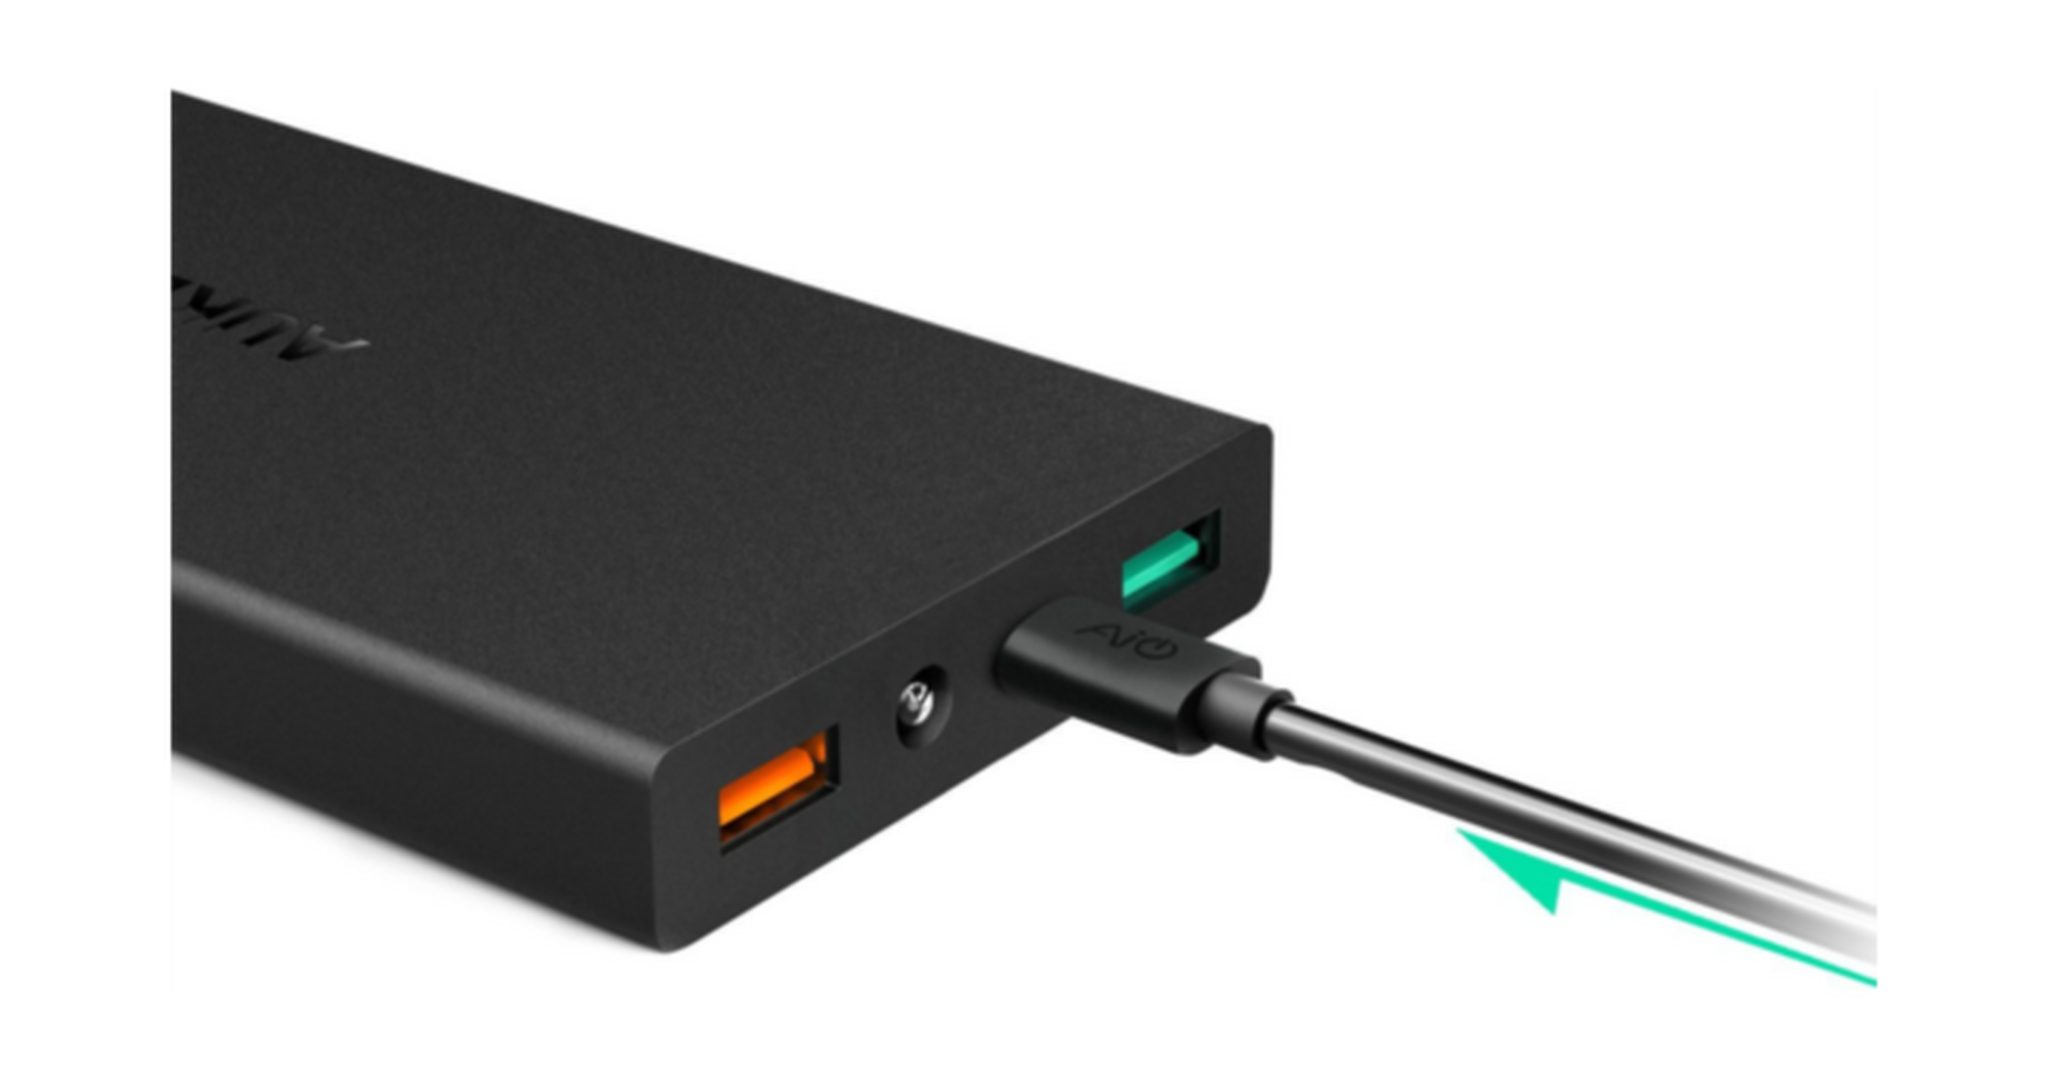 Aukey 16000mAh Quick Charge 3.0 Power Bank – Black